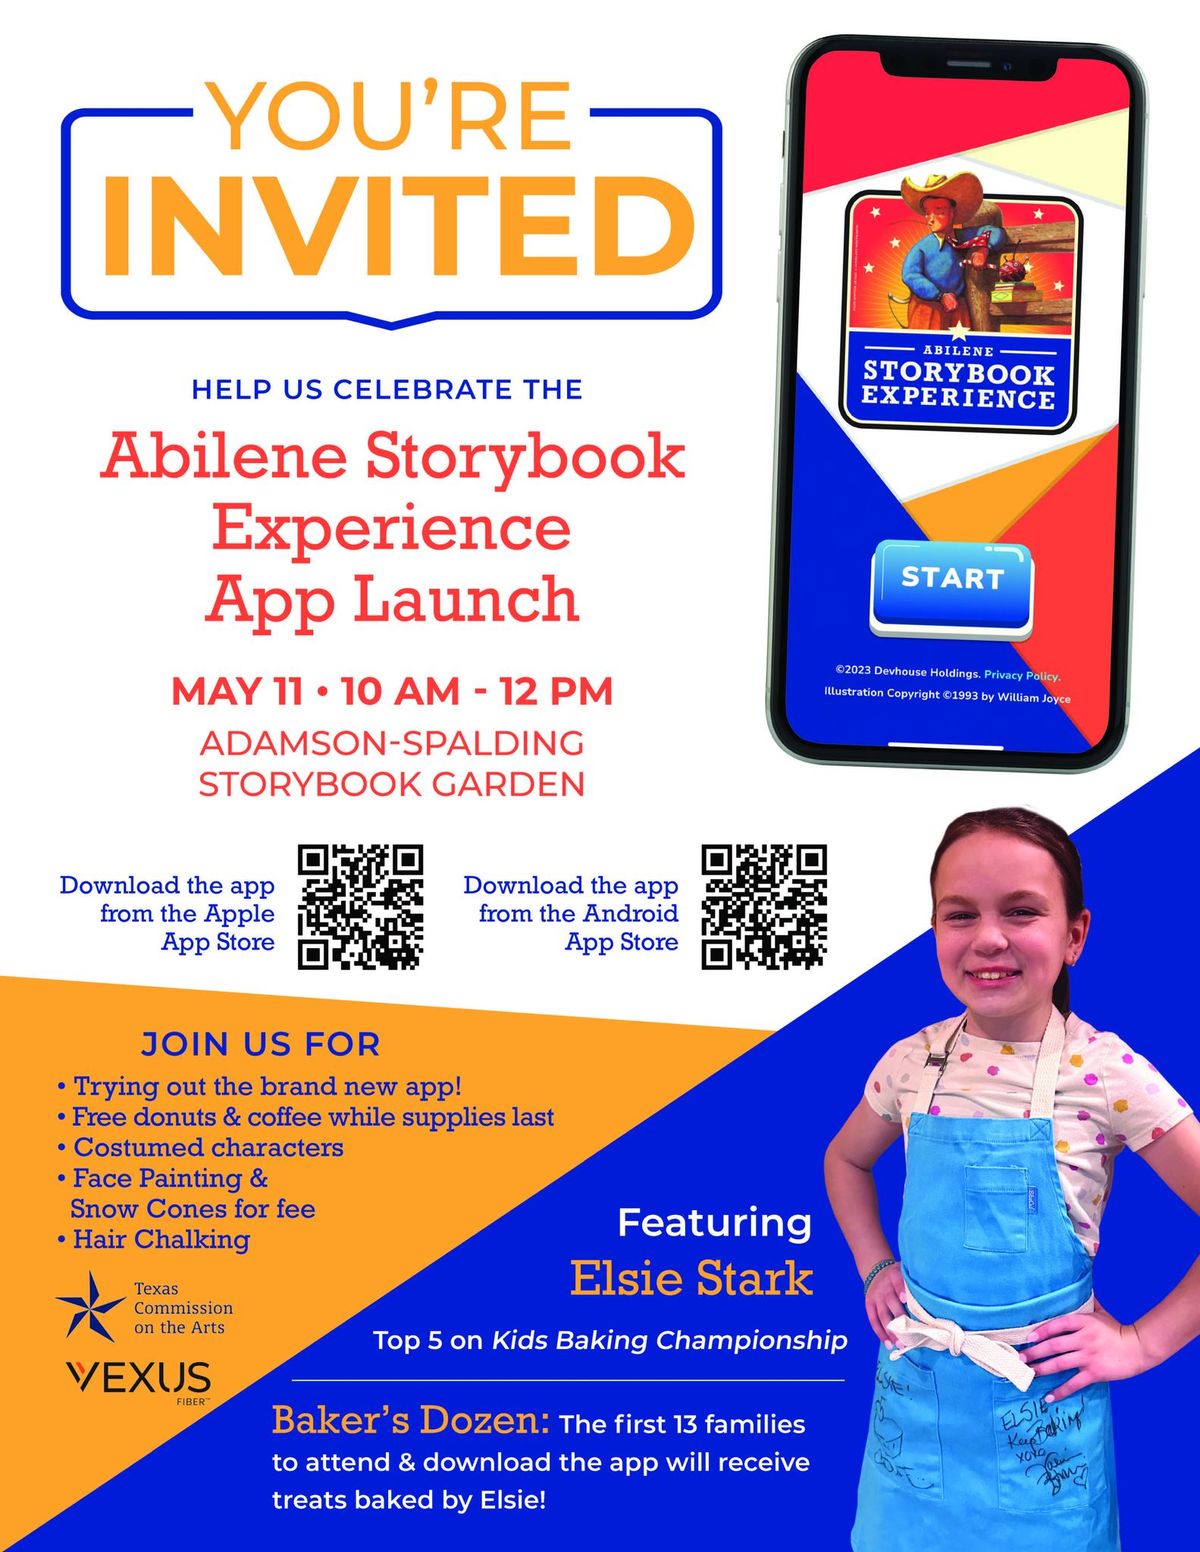 Abilene Storybook Experience App Launch Party